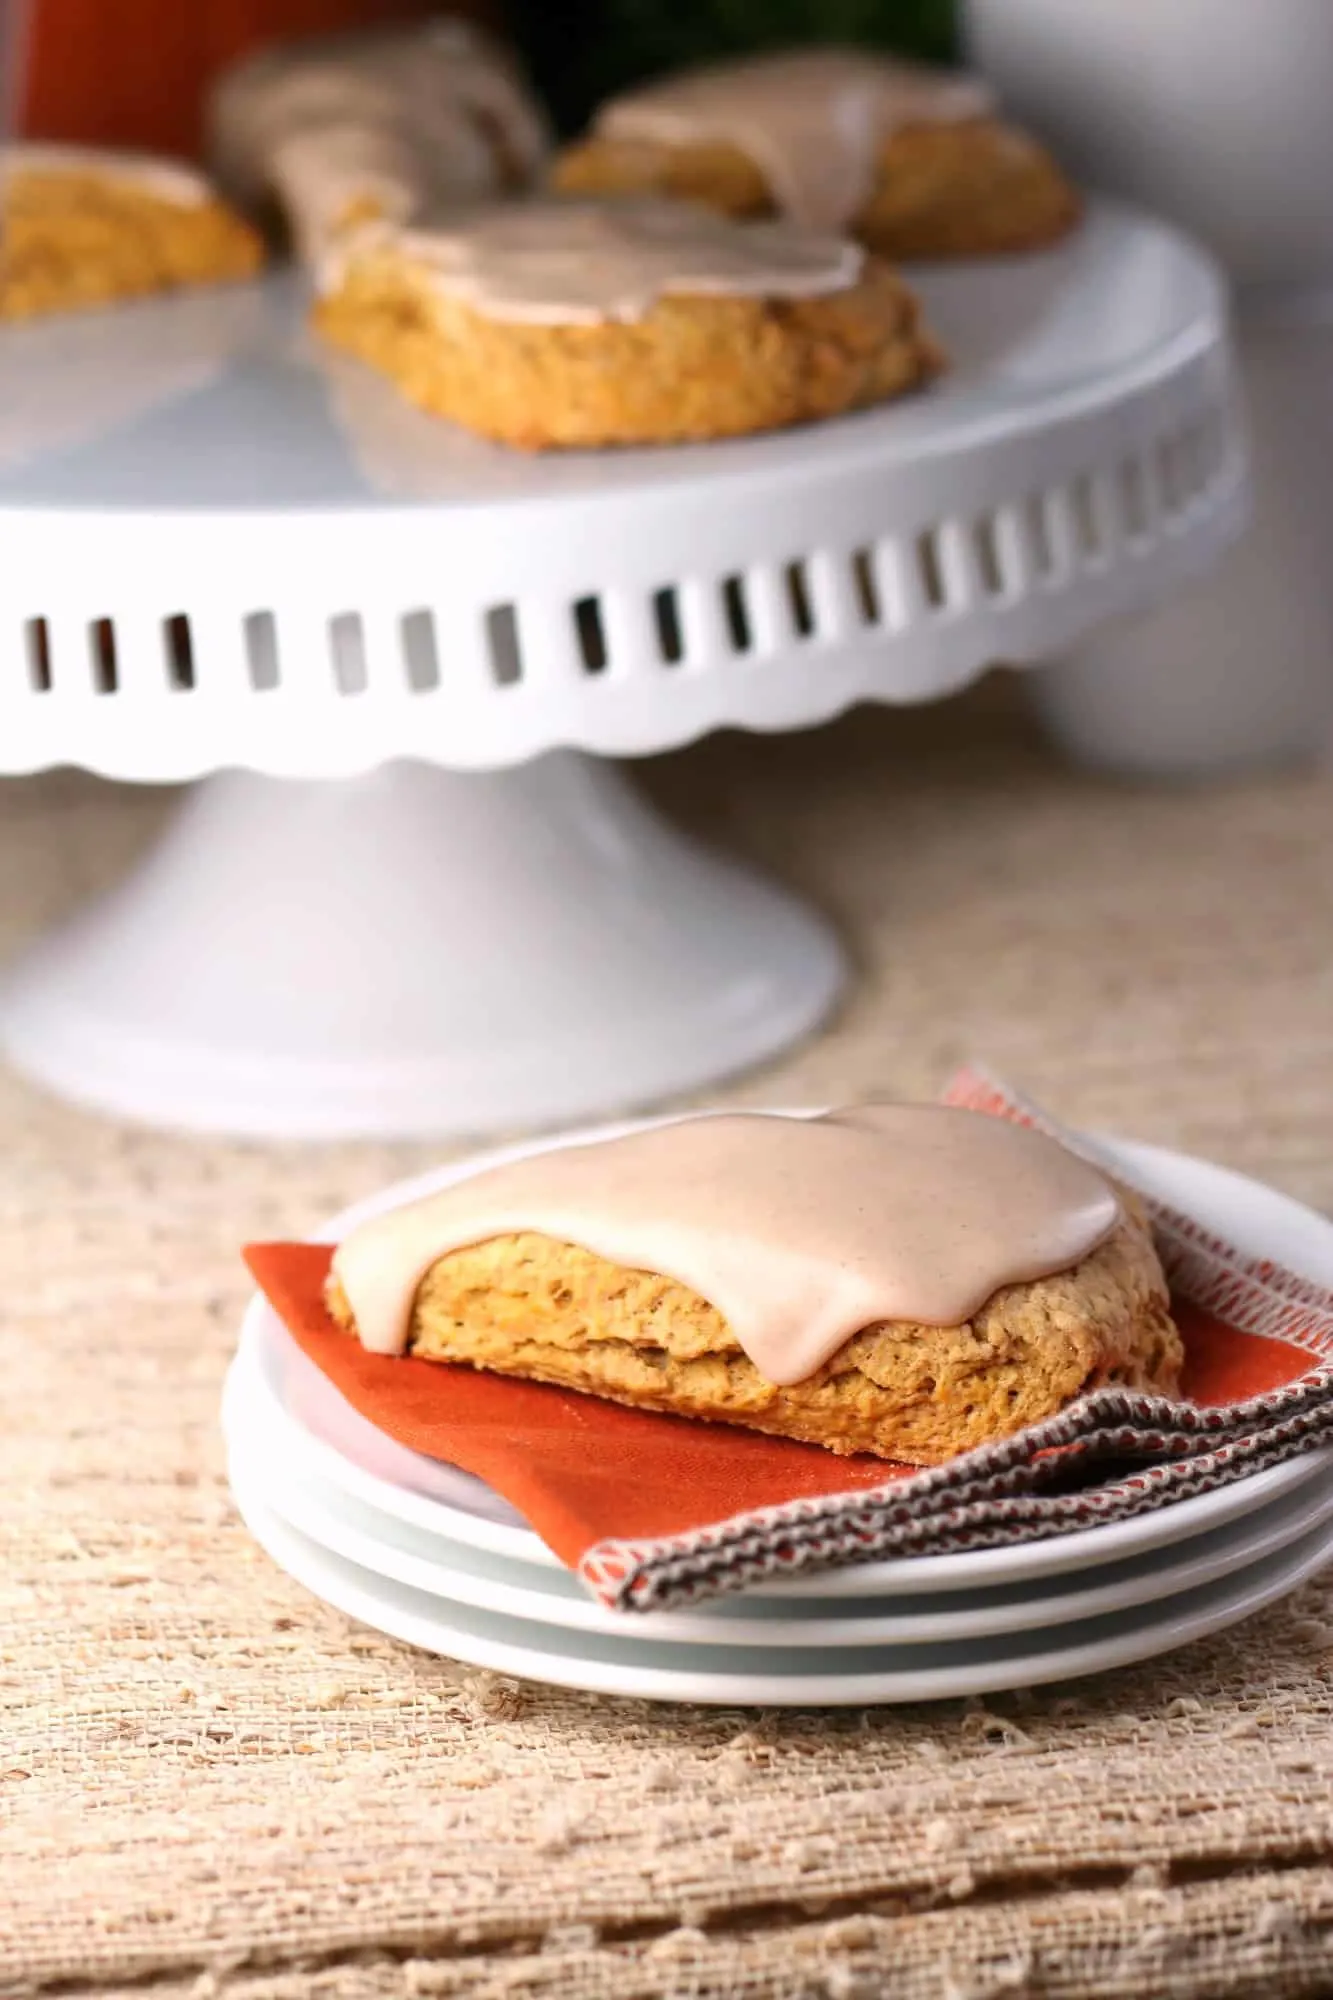 Pumpkin scone with glaze icing on white stack of plates